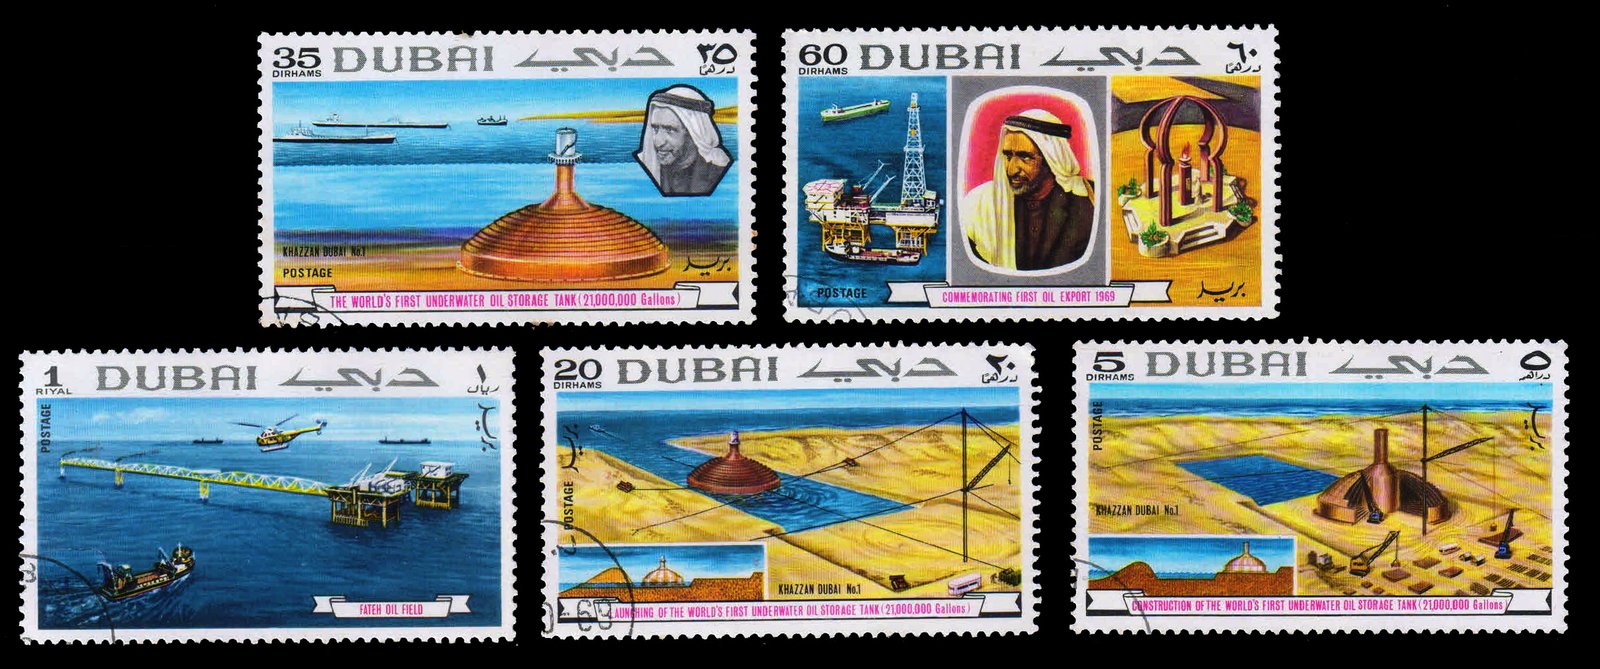 DUBAI 1969 - Oil Industry. Ruler. Oil Rig and Monument. Underwater Tank. Set of 5, Used. S.G. 341-345 